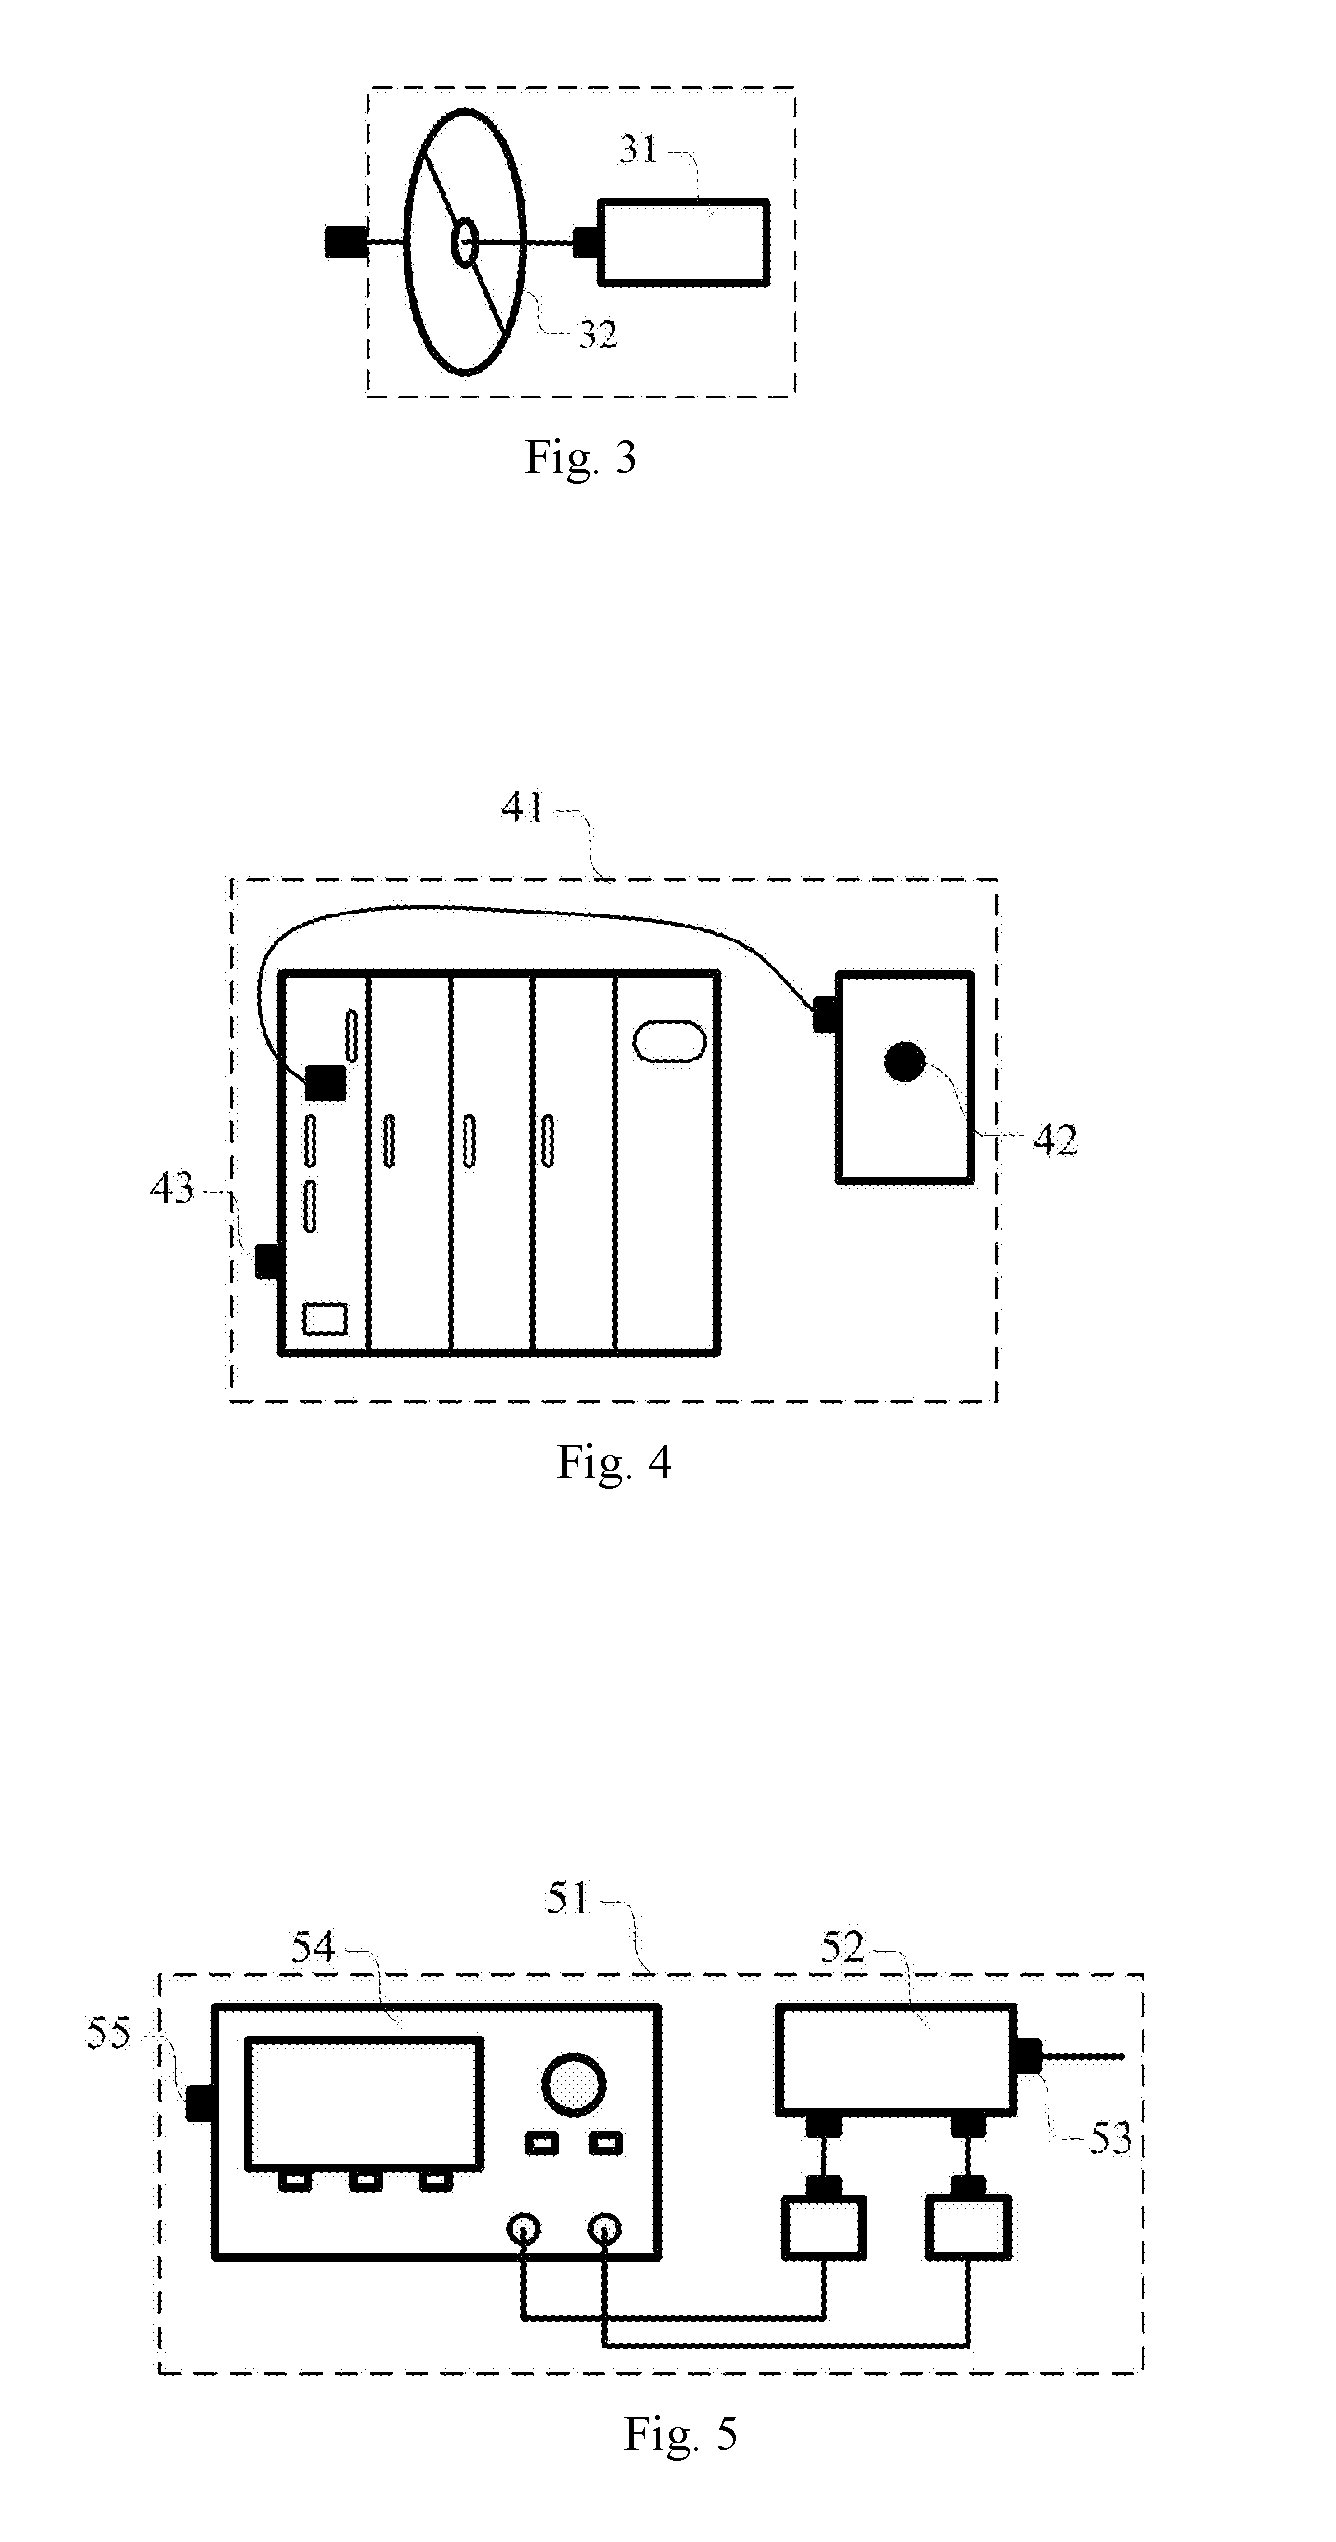 Method And Equipment Based On Detecting The Polarization Property Of A Polarization Maintaining Fiber Probe For Measuring Structures Of A Micro Part